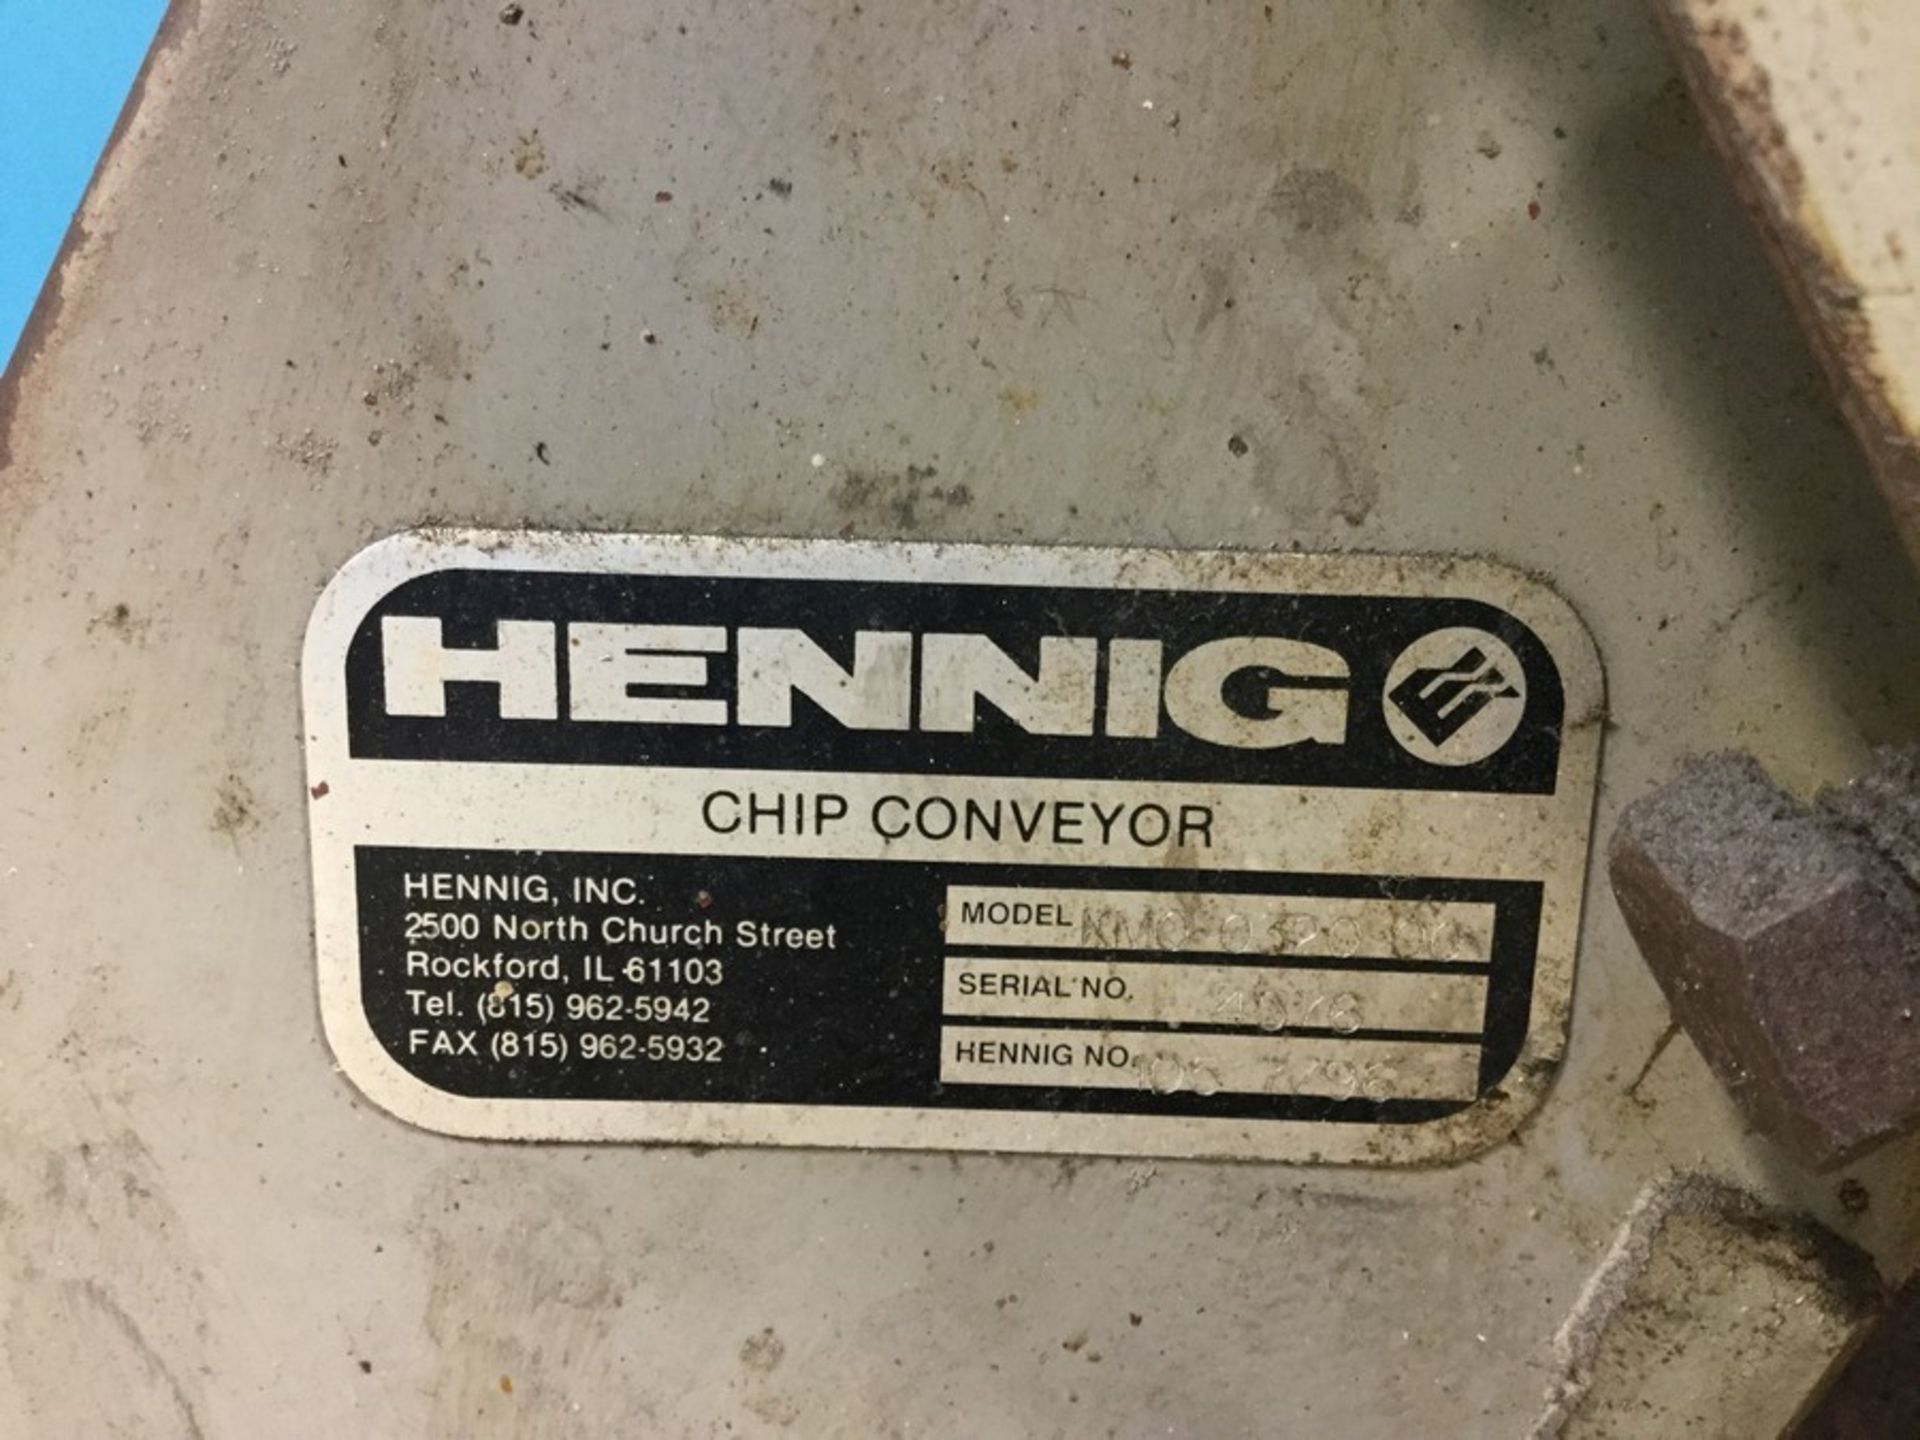 HENNIG chip conveyor model KM0-0320-00 S/N 4576 12" in. Wide Chip Track, with SUMITOMO 8 HP motor - Image 5 of 7